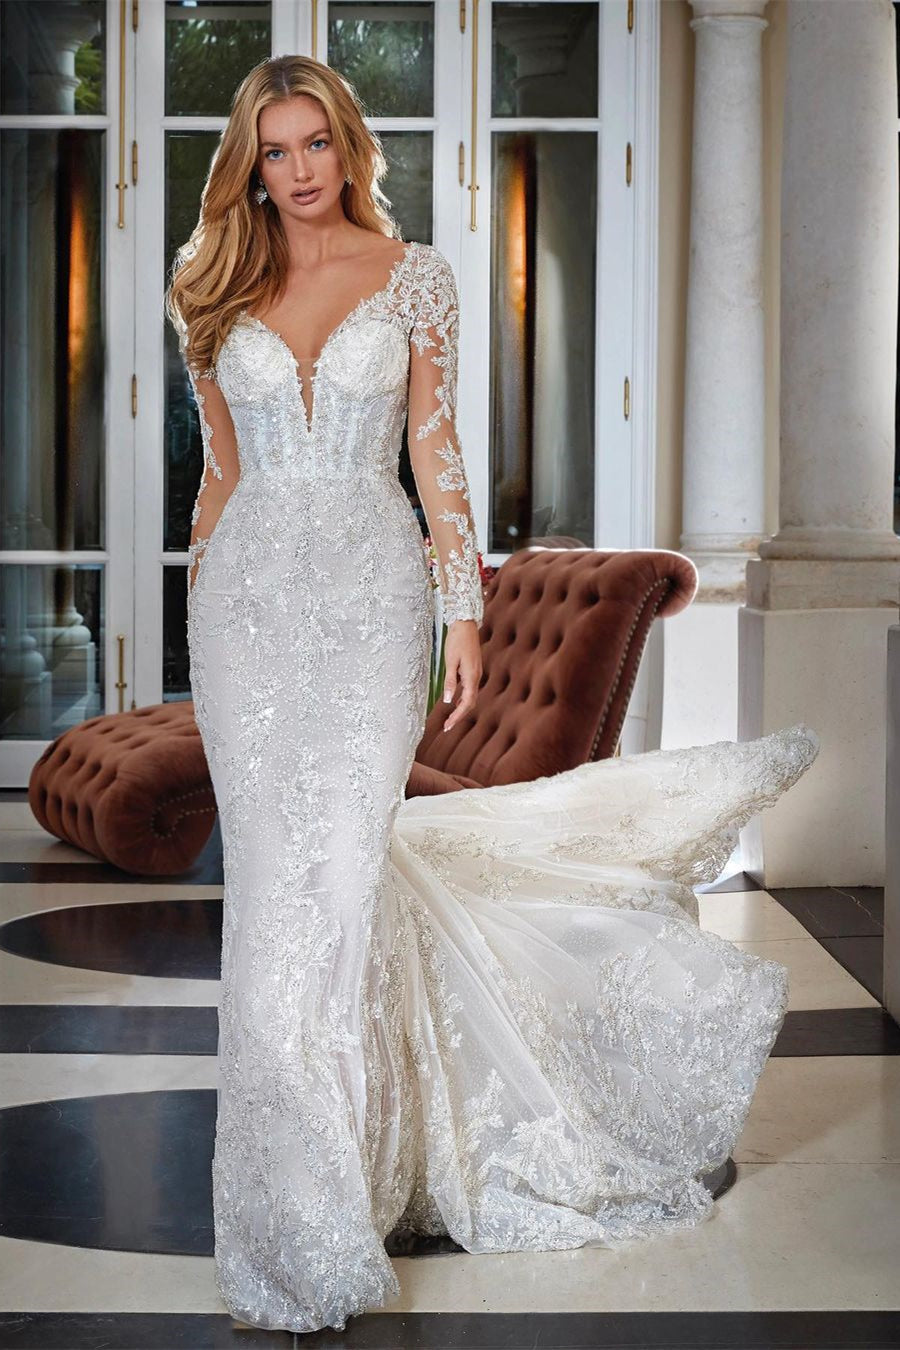 Suzhoufashion Gorgeous Mermaid V-Neck Lace Backless Appliques Bridal Dresses With Long Sleeves